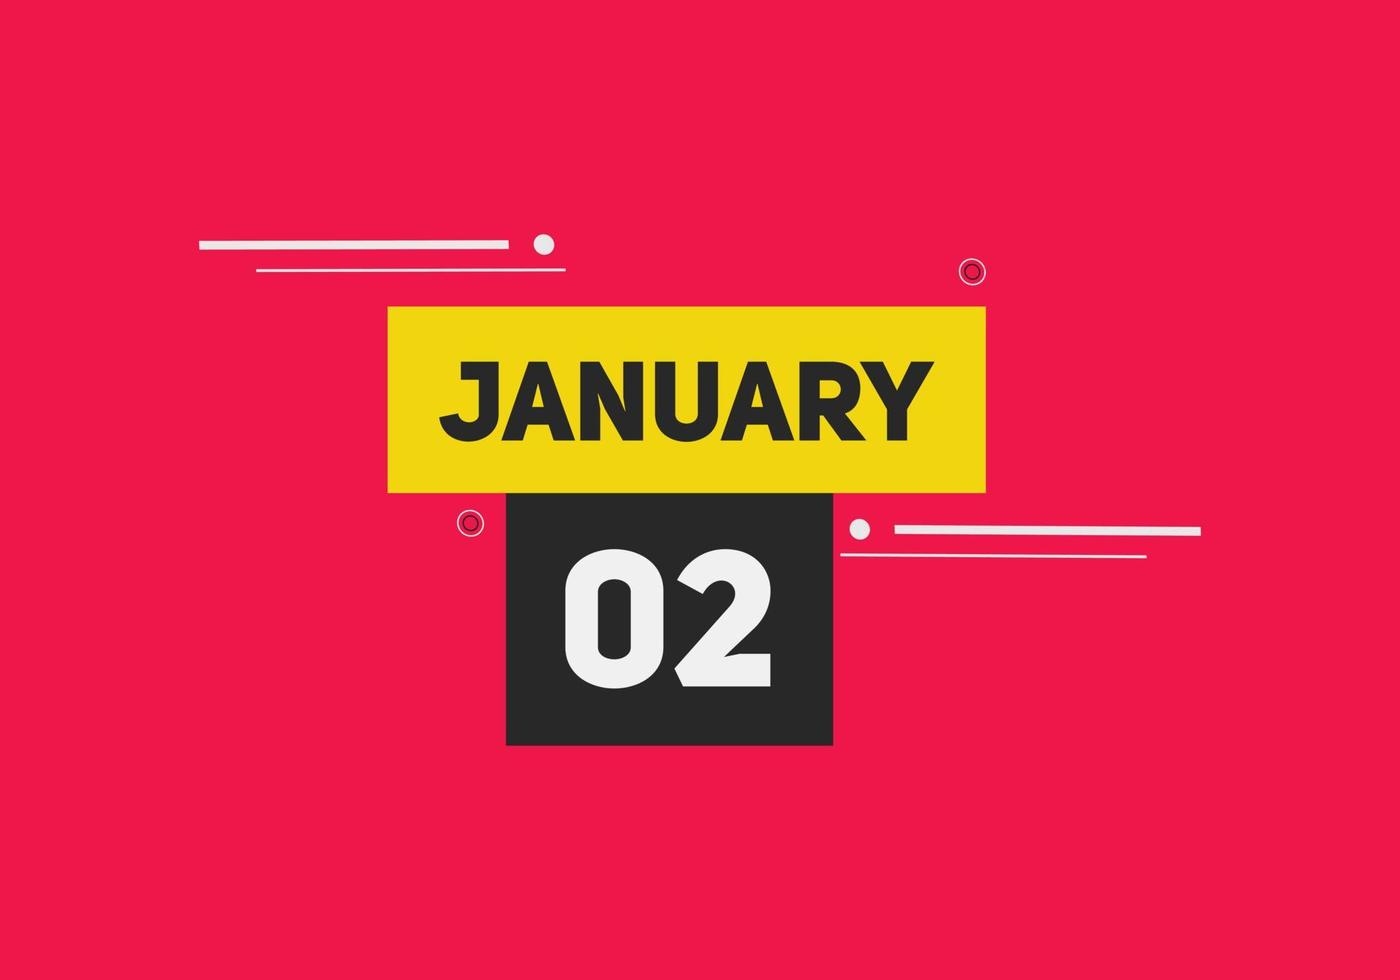 january 2 calendar reminder. 2nd january daily calendar icon template. Calendar 2nd january icon Design template. Vector illustration